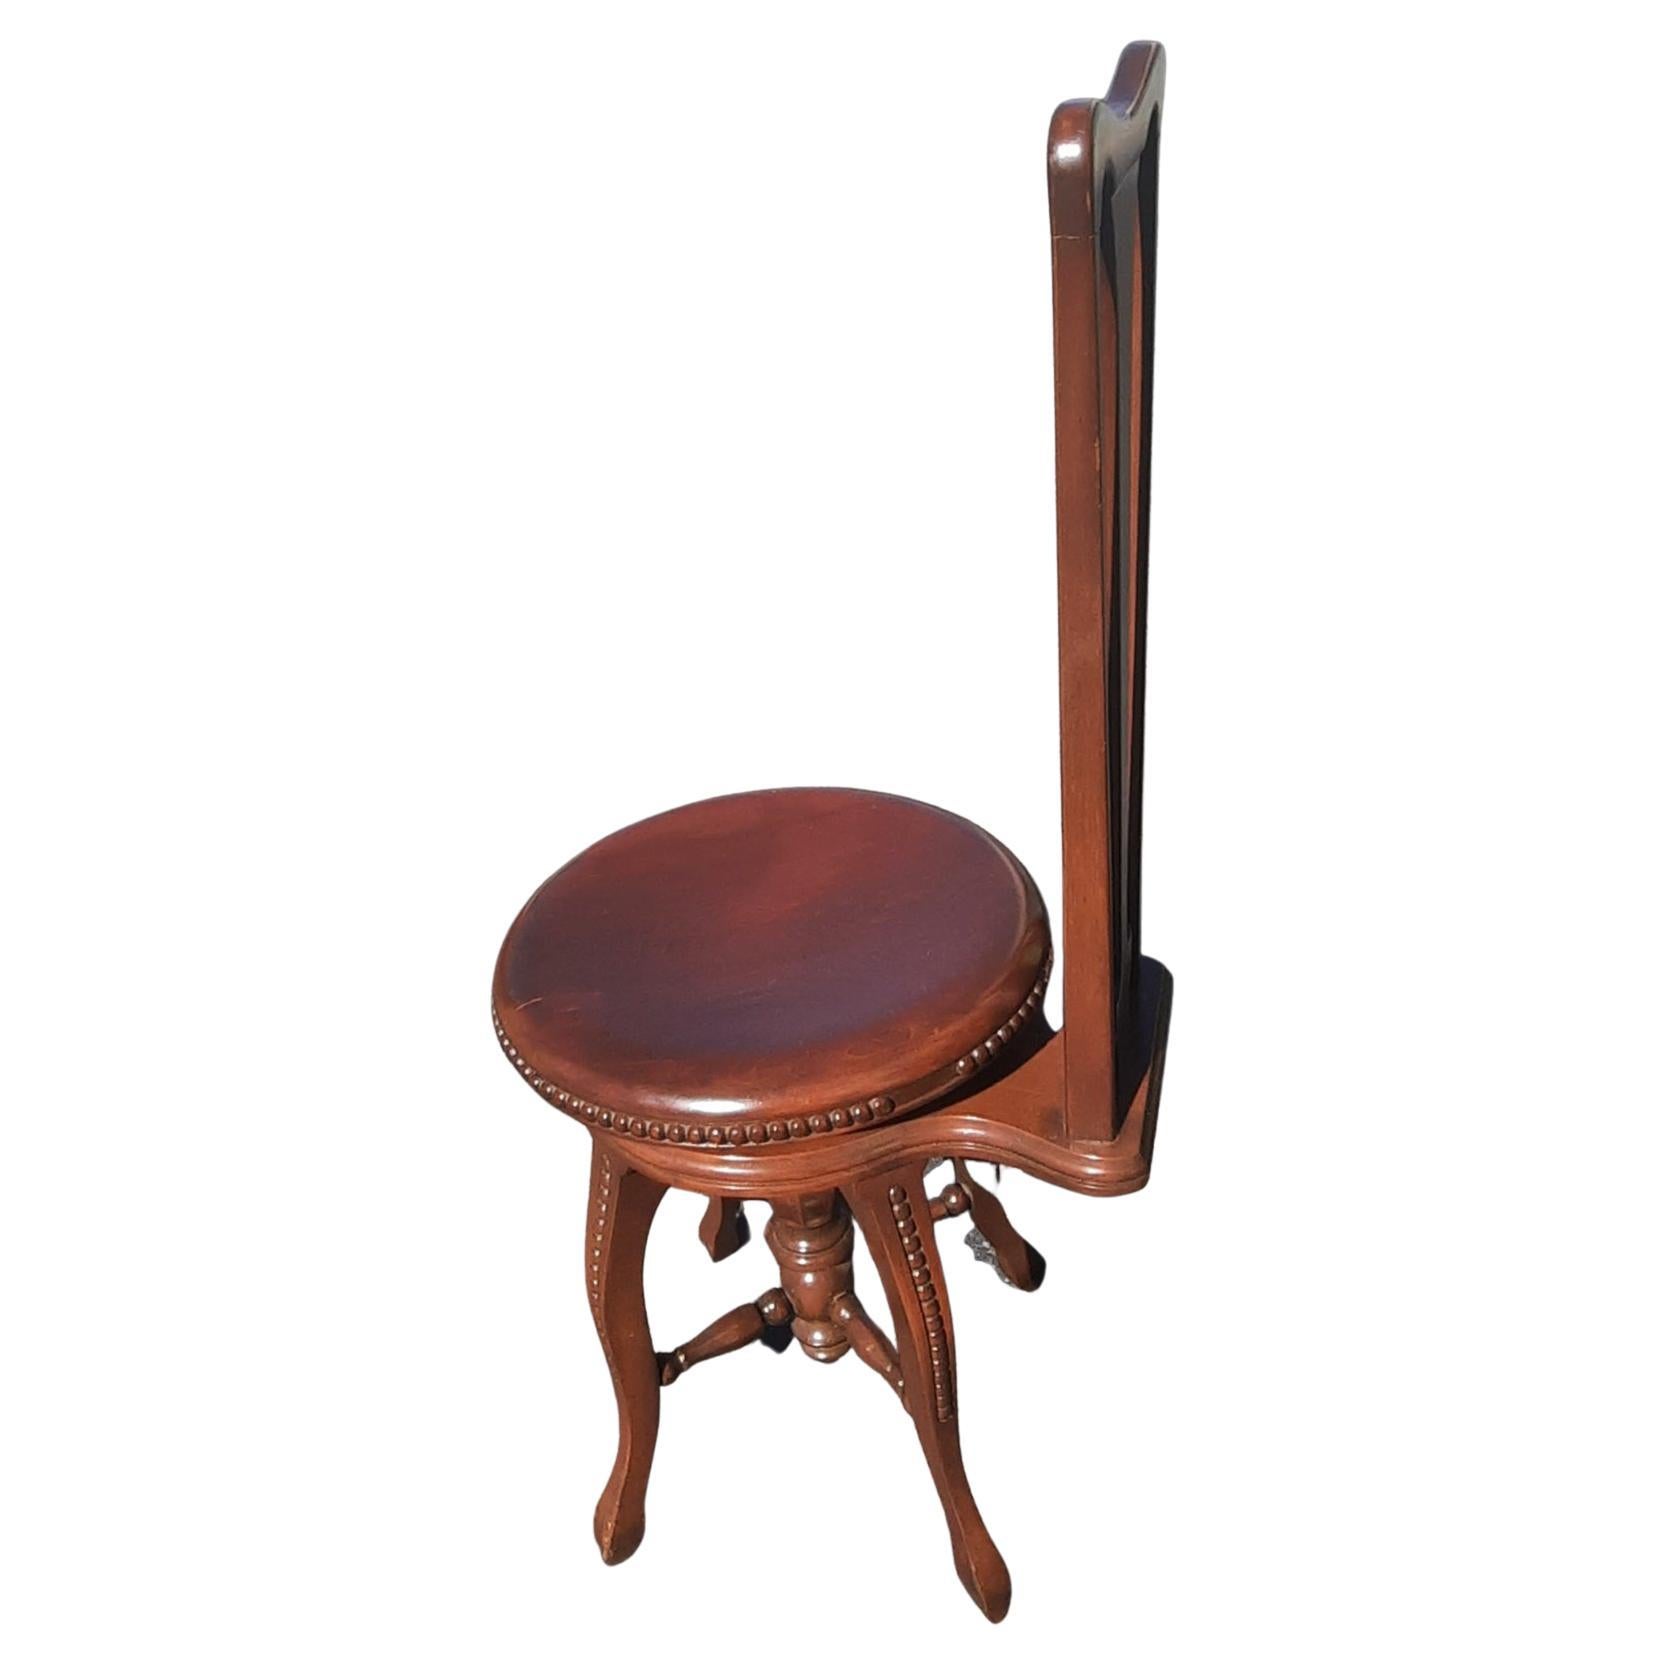 Metal Antique Carved Mahogany Adjustable Seat Height Piano Chair Music Room Stool For Sale